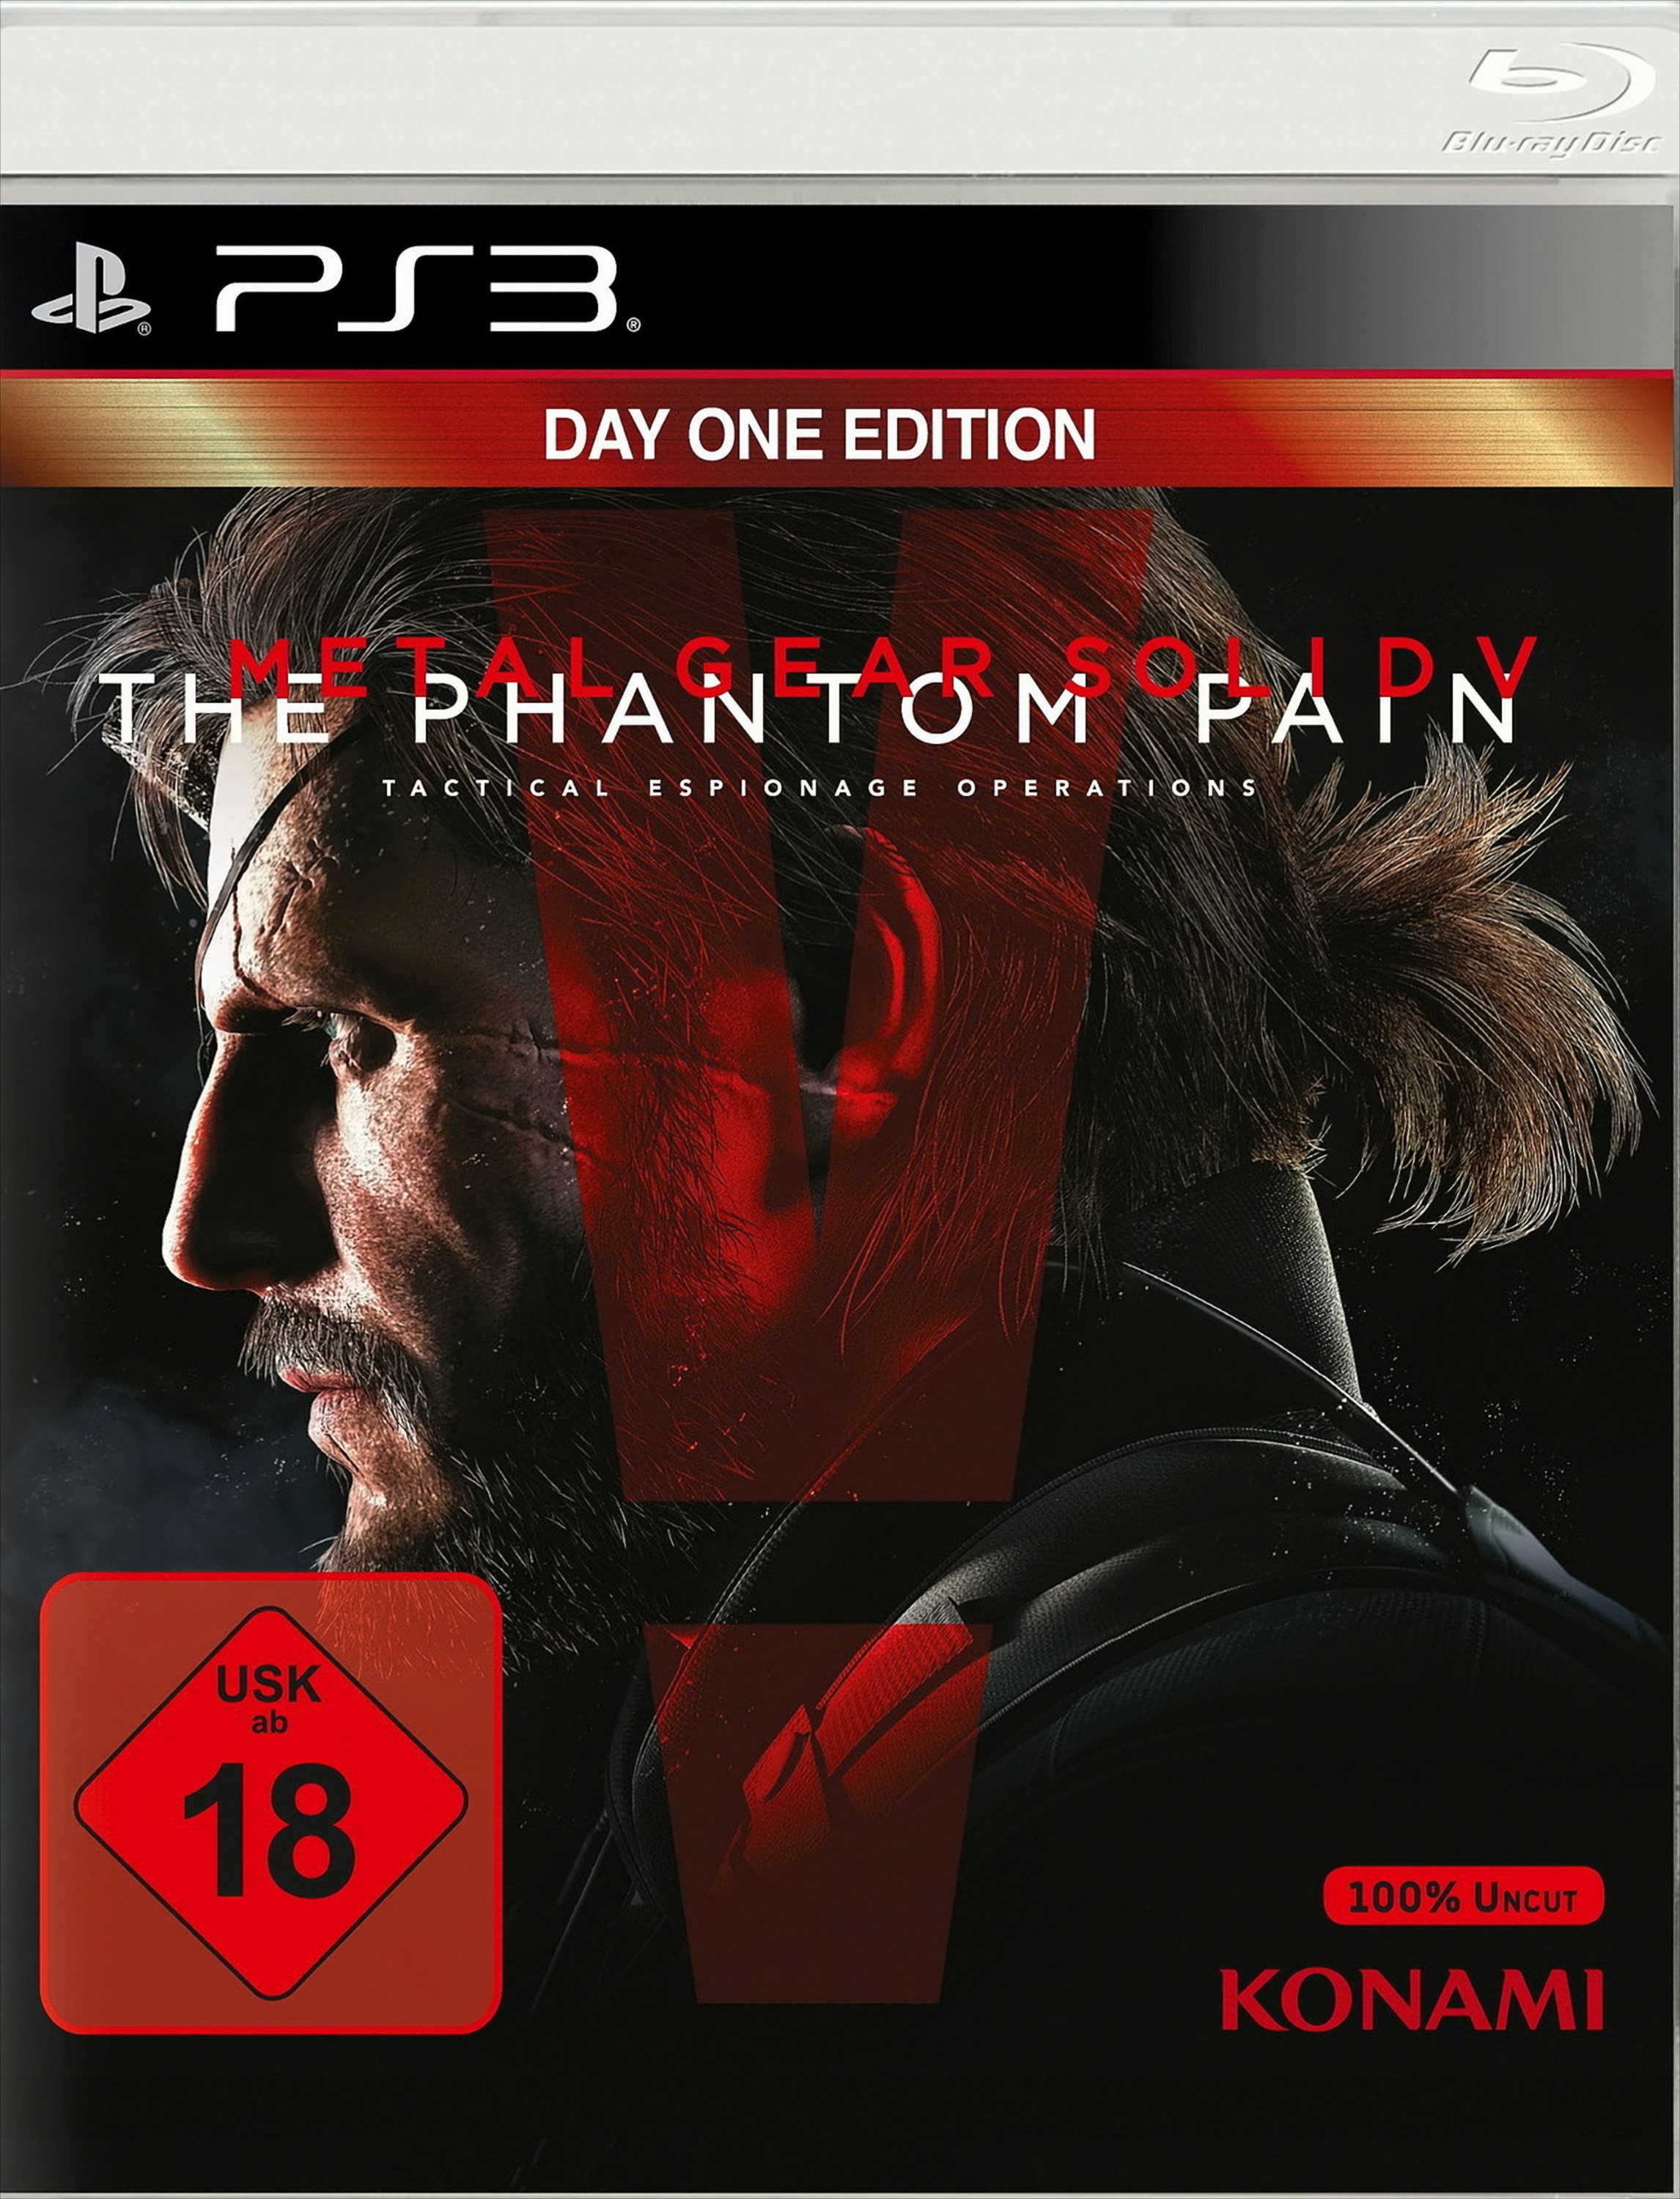 Metal Gear Solid V: The Phantom Pain - Day One Edition Playstation 3